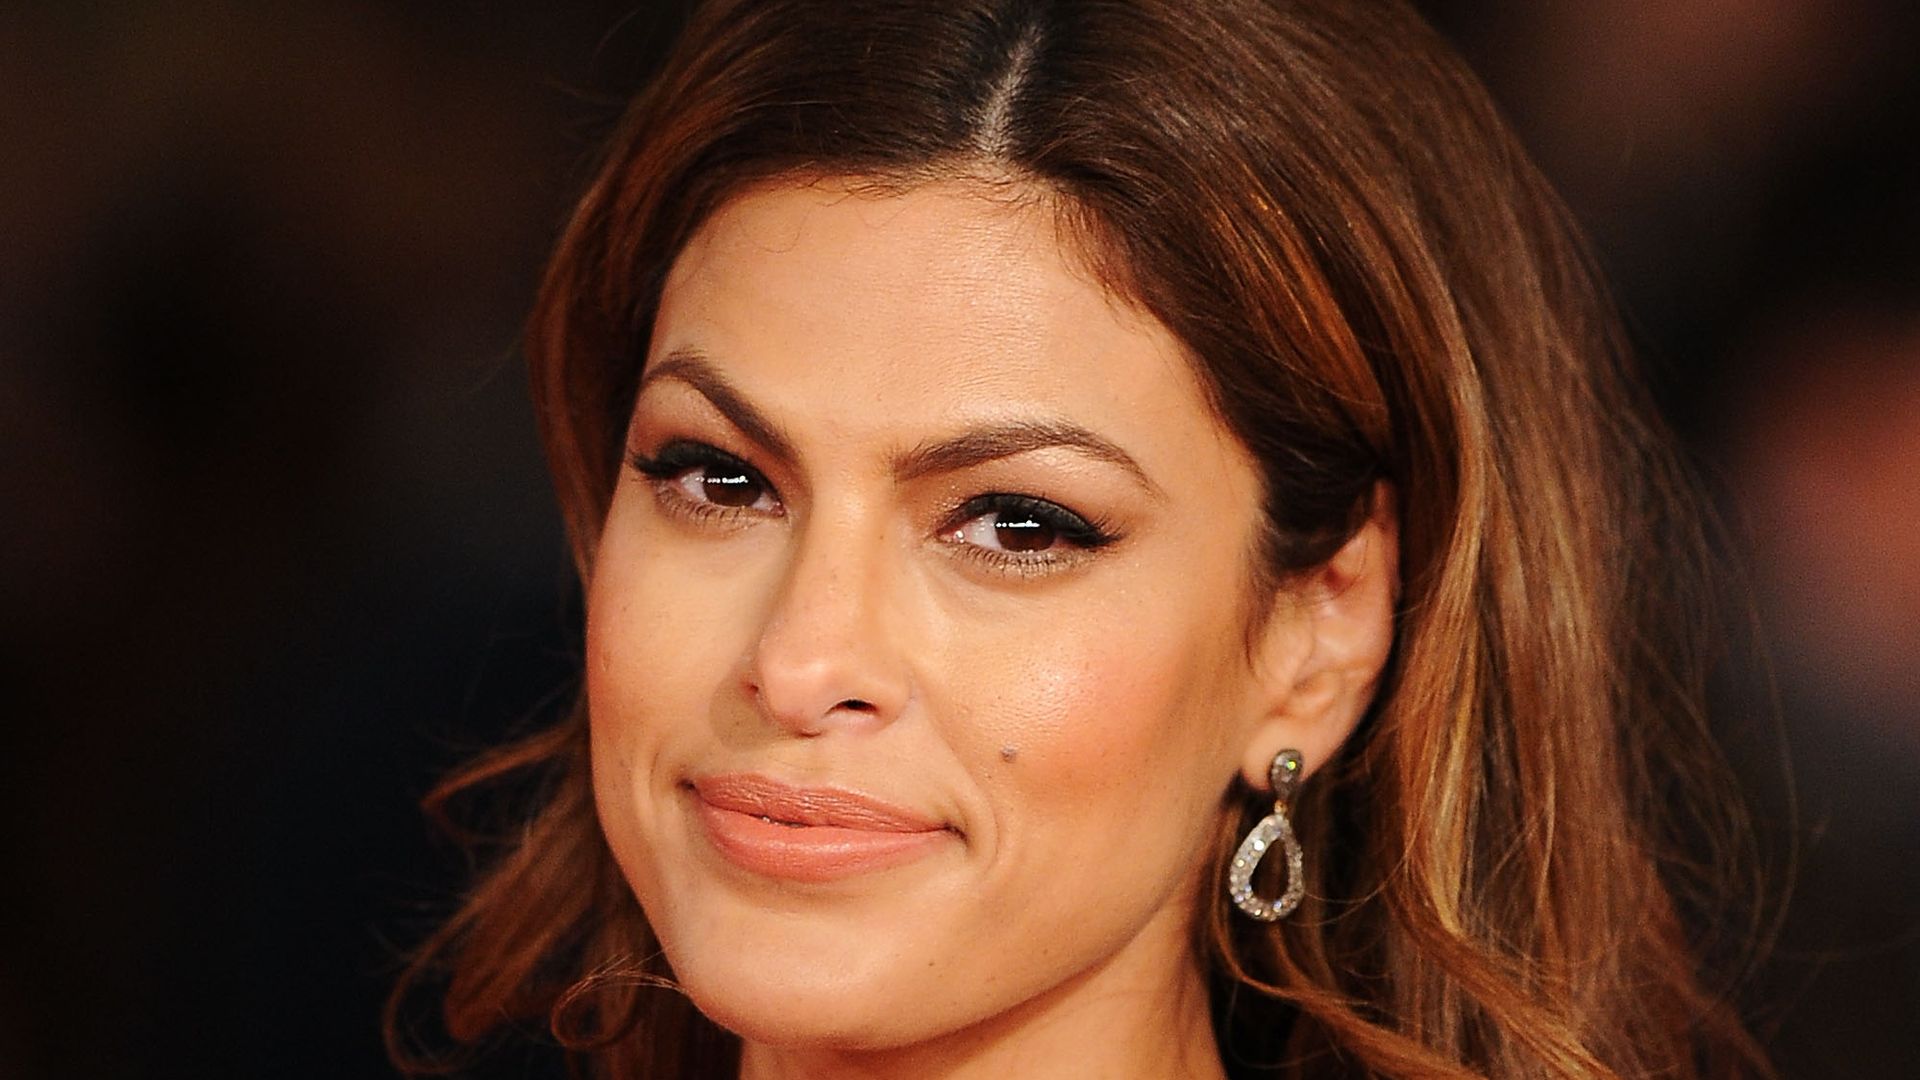 Eva Mendes attends the "La dolce vita" world restoration premiere during The 5th International Rome Film Festival on October 30, 2010 in Rome, Italy